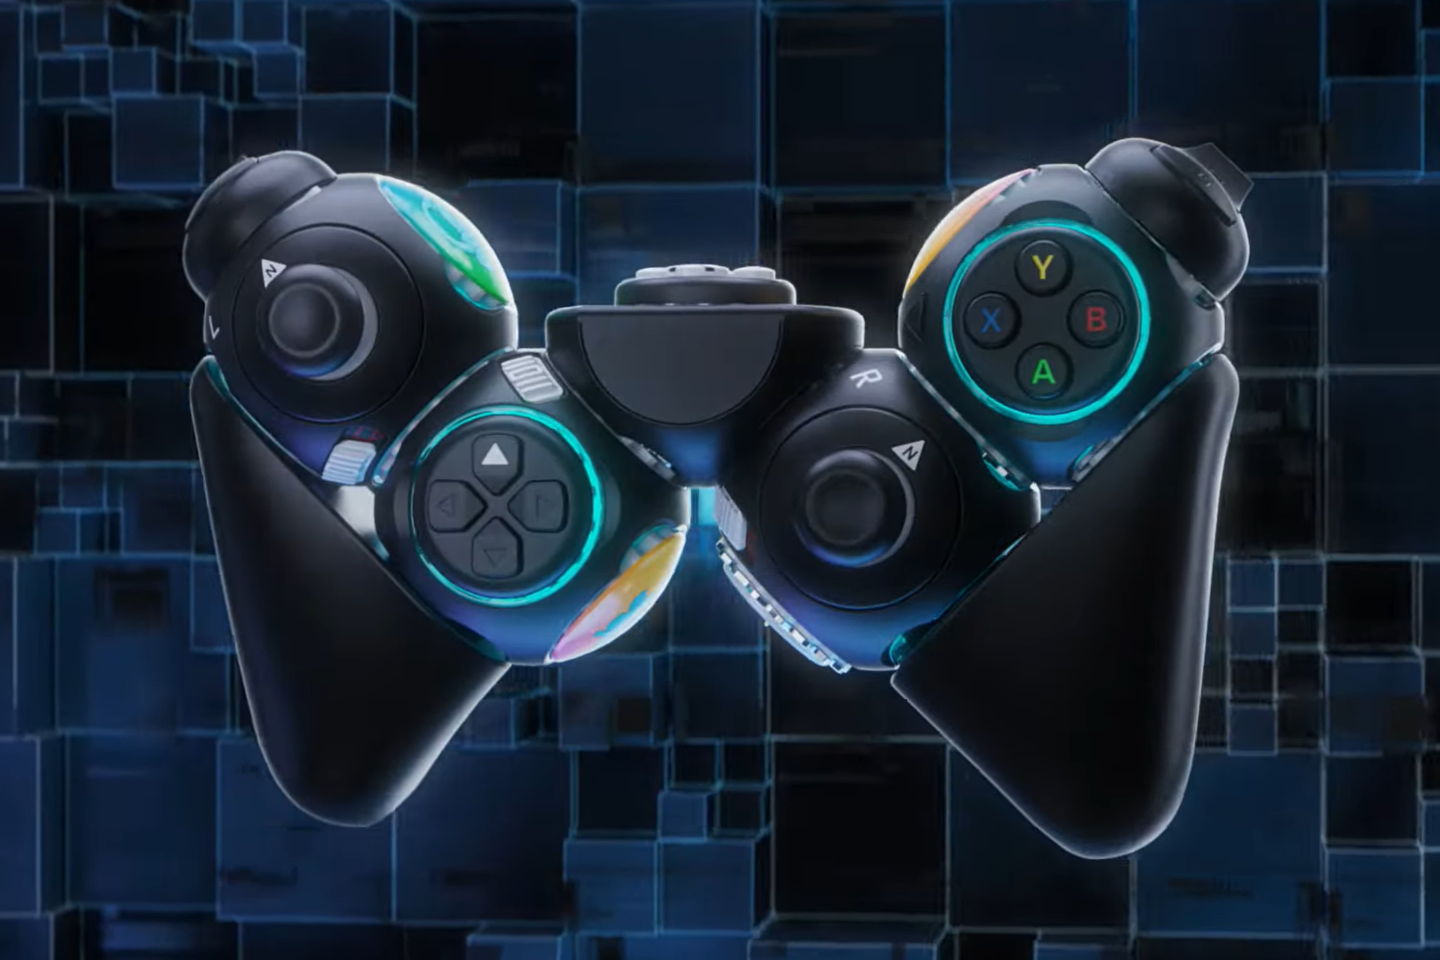 ByoWave's heavily customizable Proteus controller, for Xbox and PC gamers with disabilities.